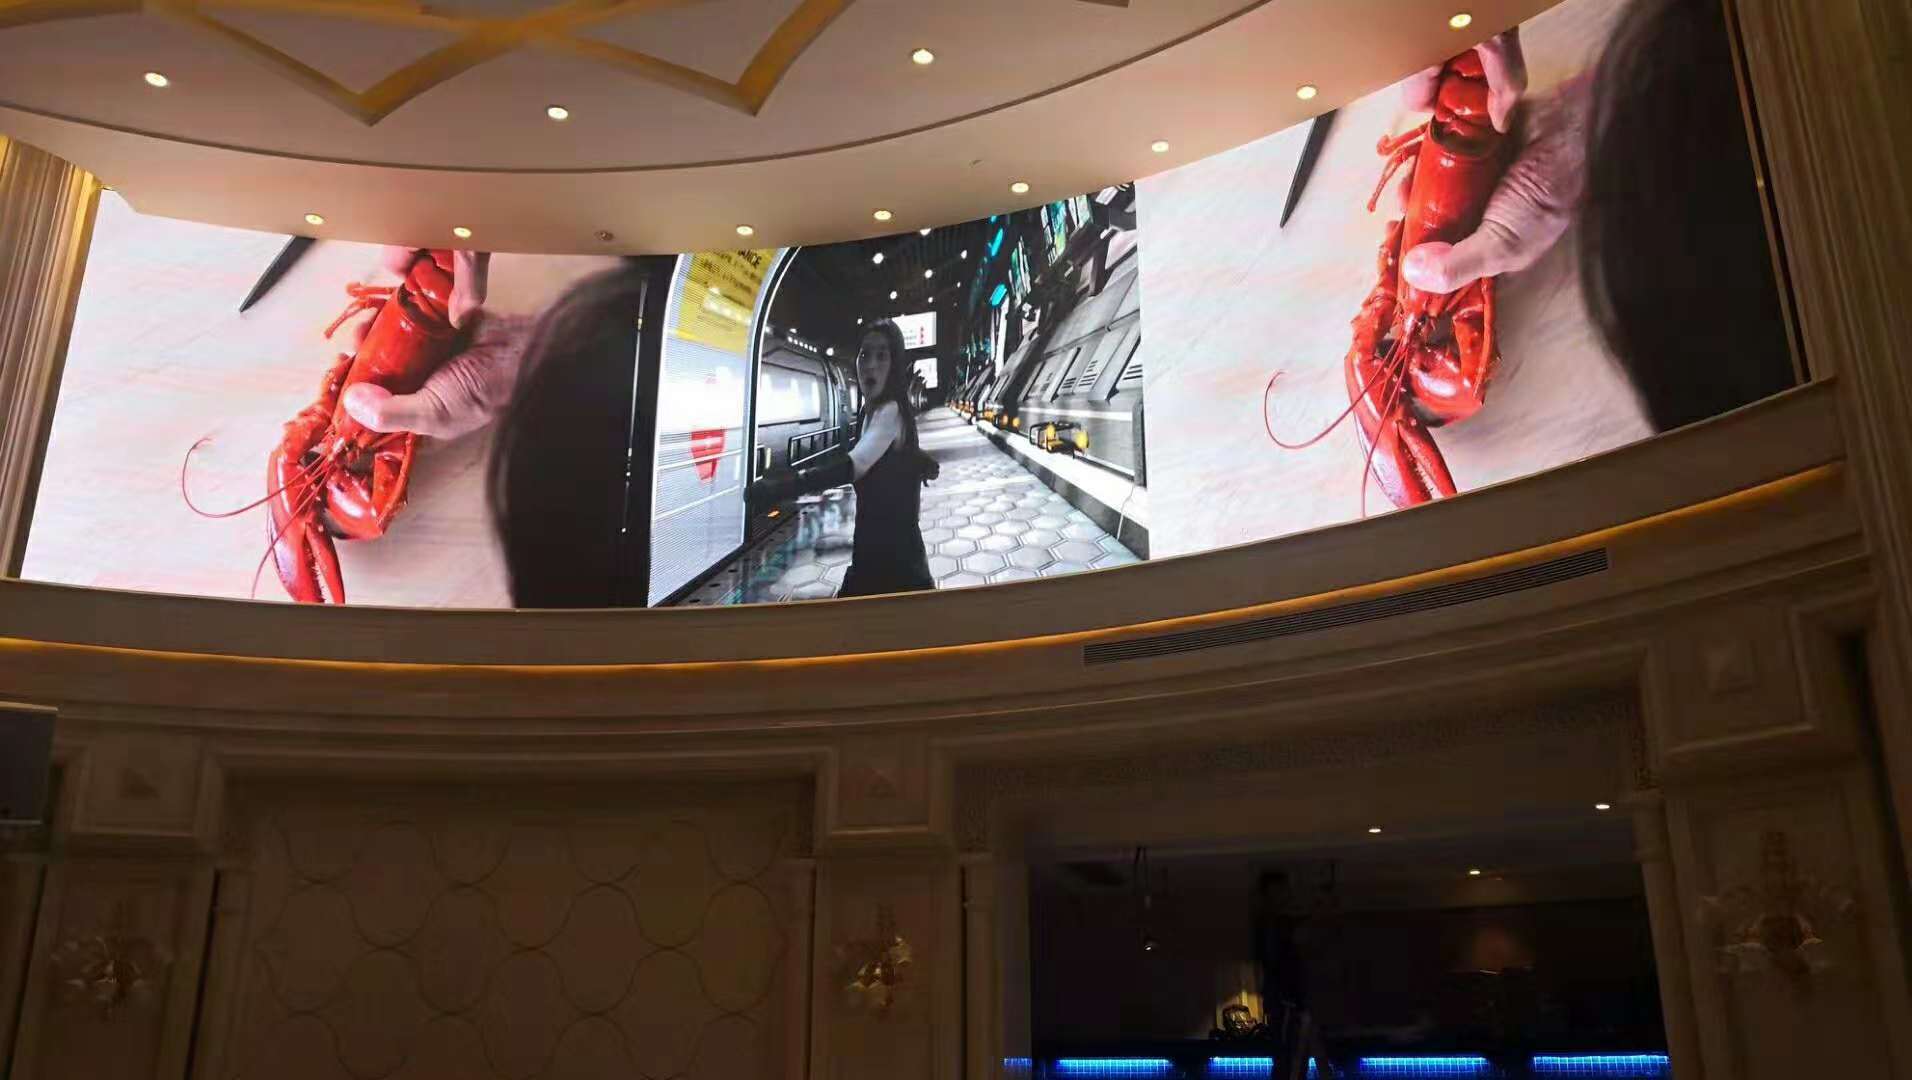 The indoor P2 arc full-color display in Guilin, Guangxi was successfully completed